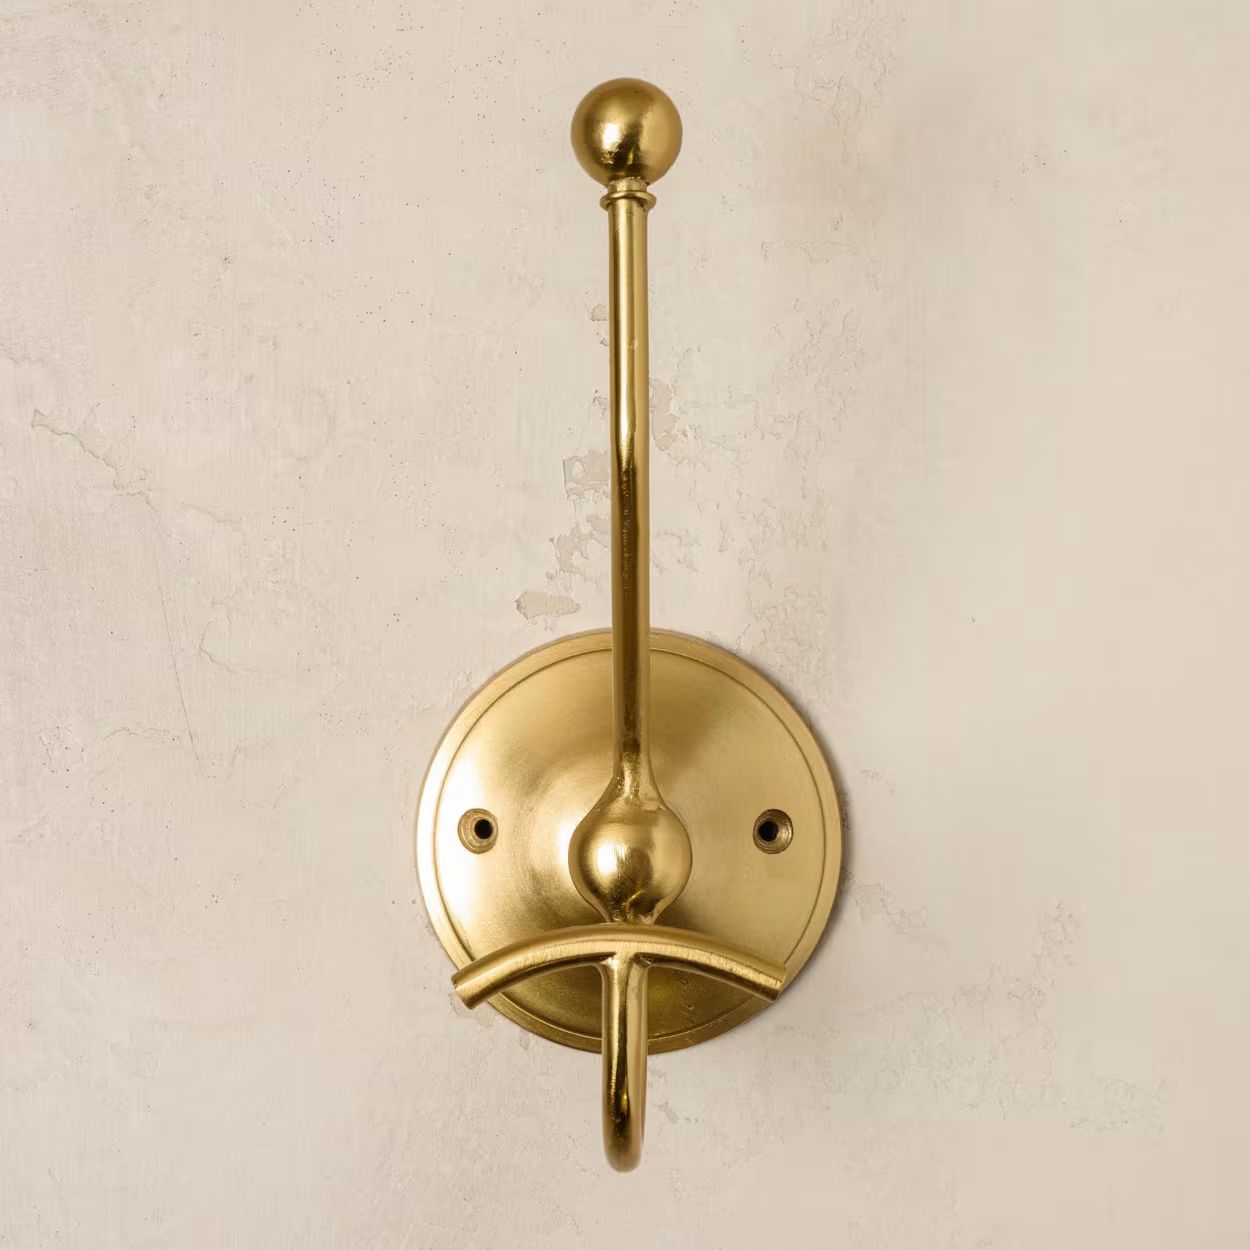 Henry Antiqued Brass Wall Hook | Magnolia